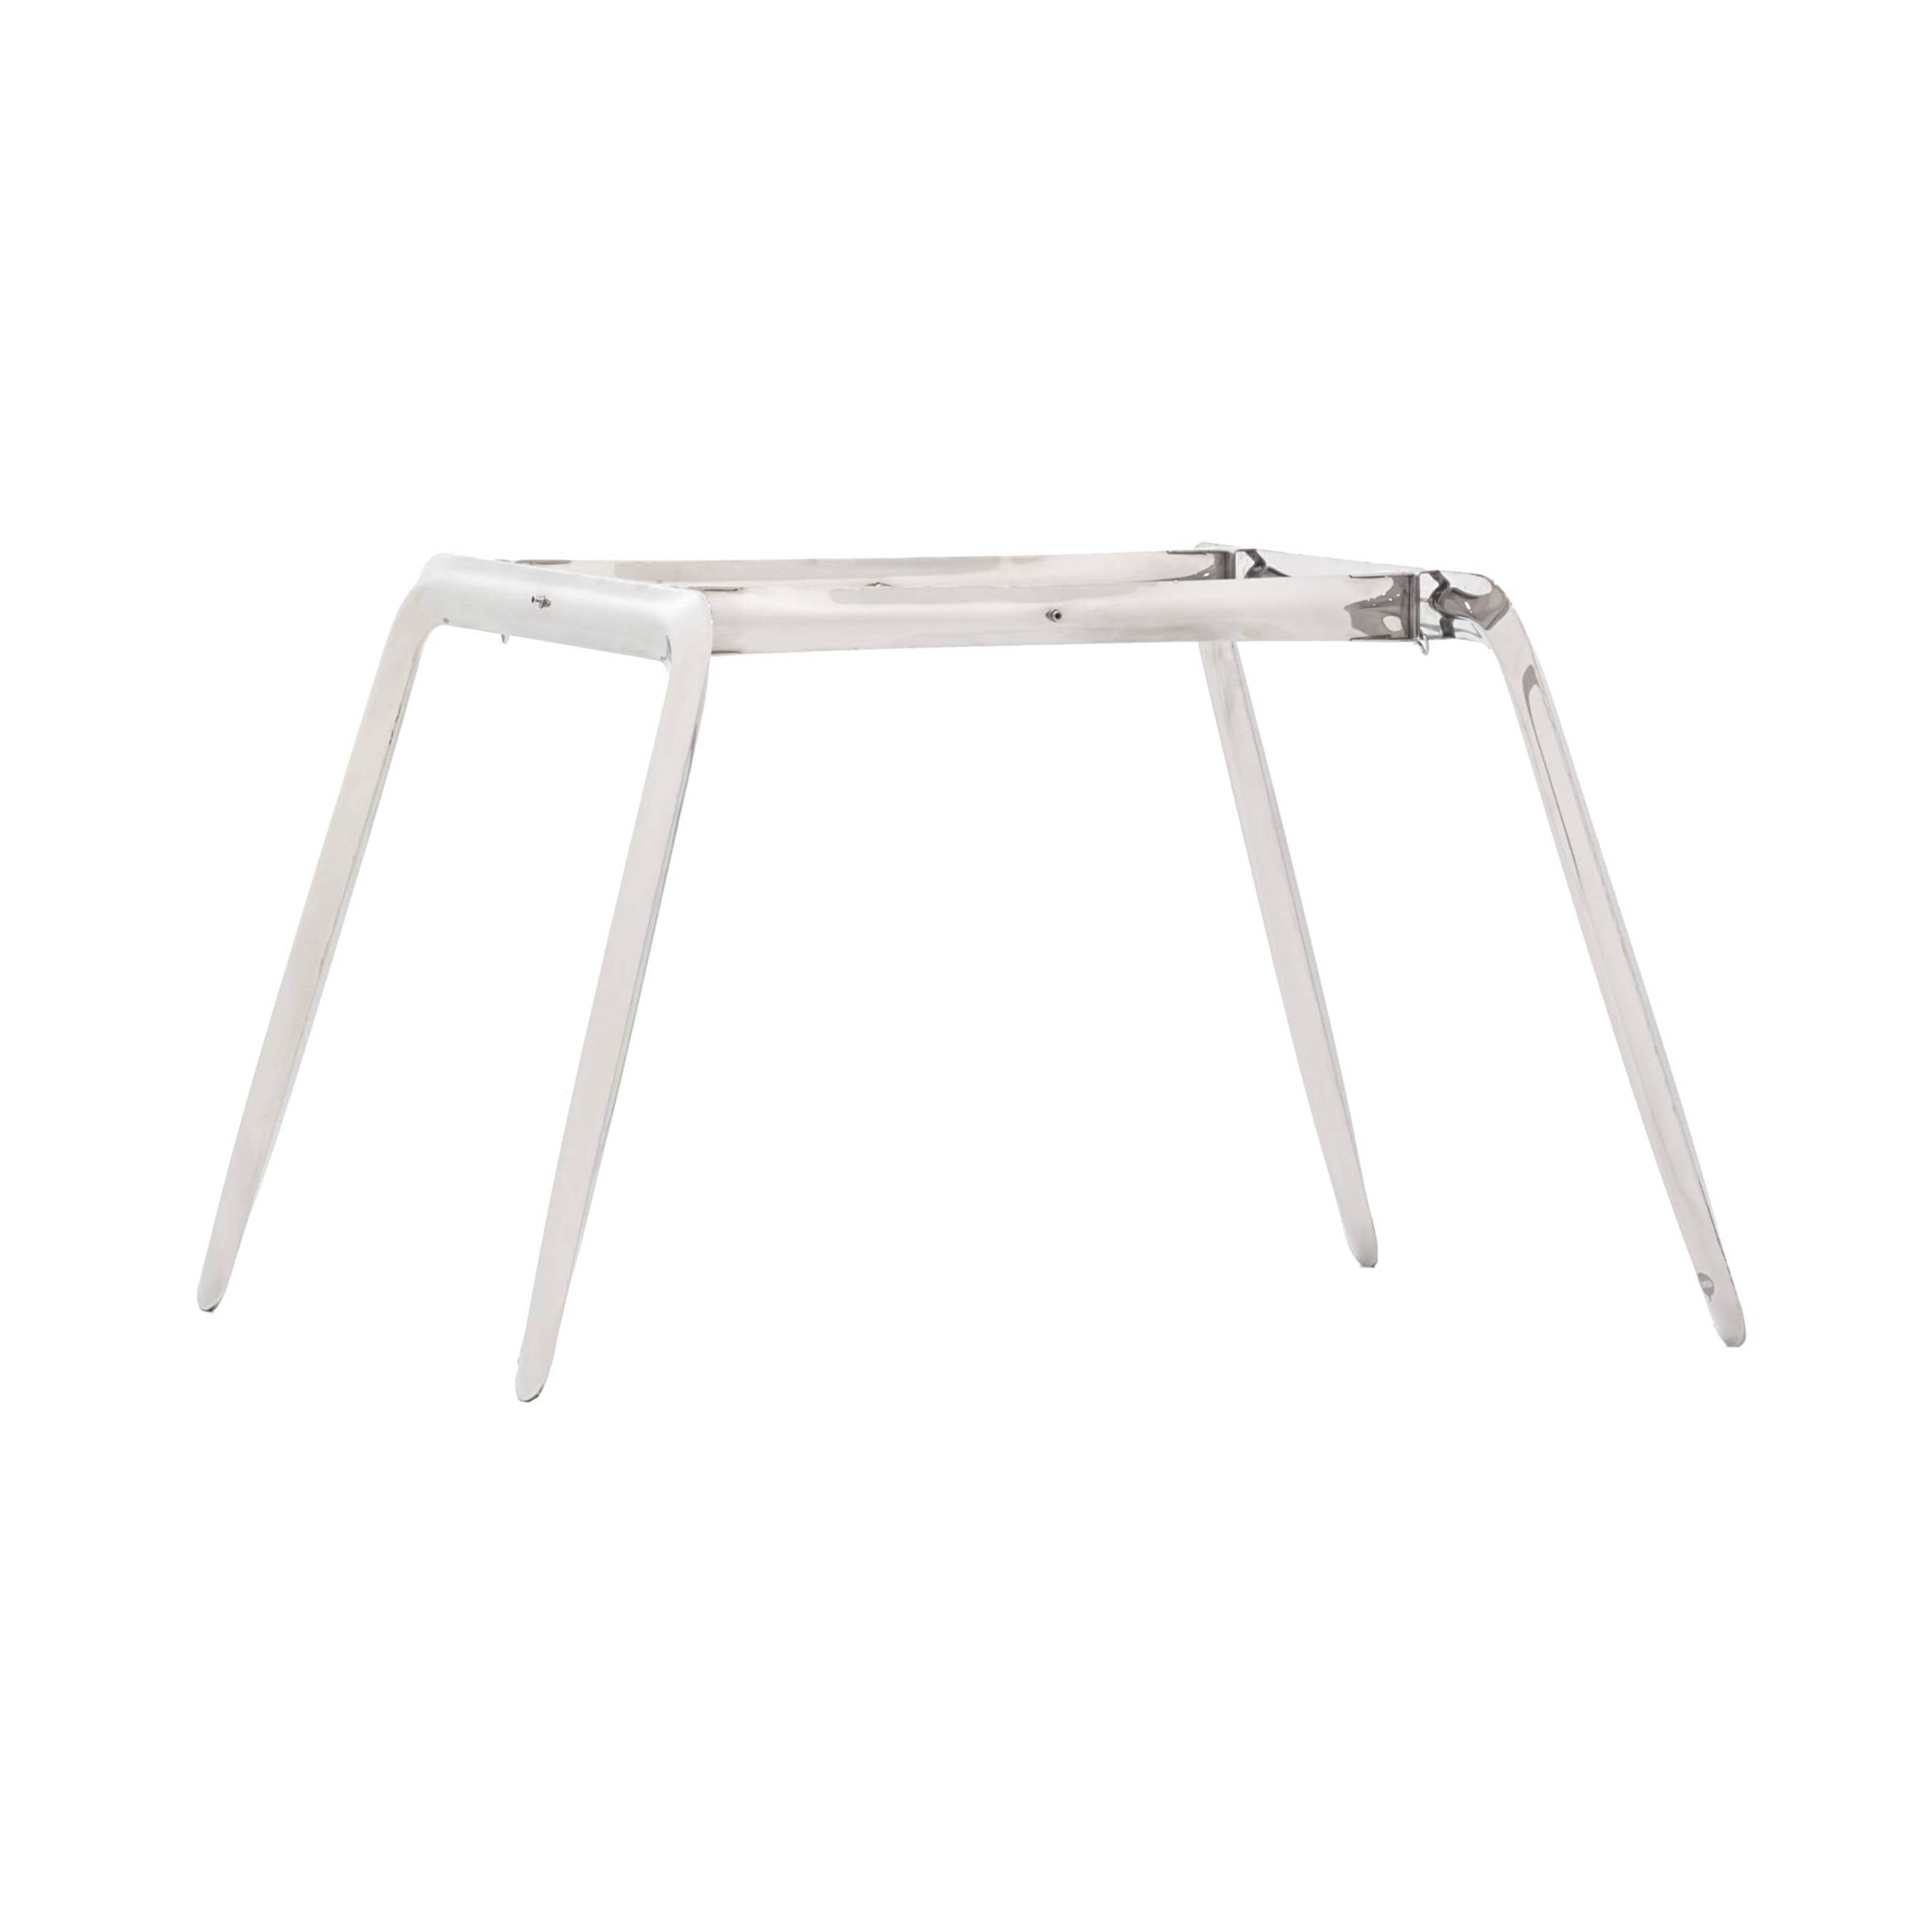 Koziol Table Frame: Raw Steel Lacquered Carbon Steel